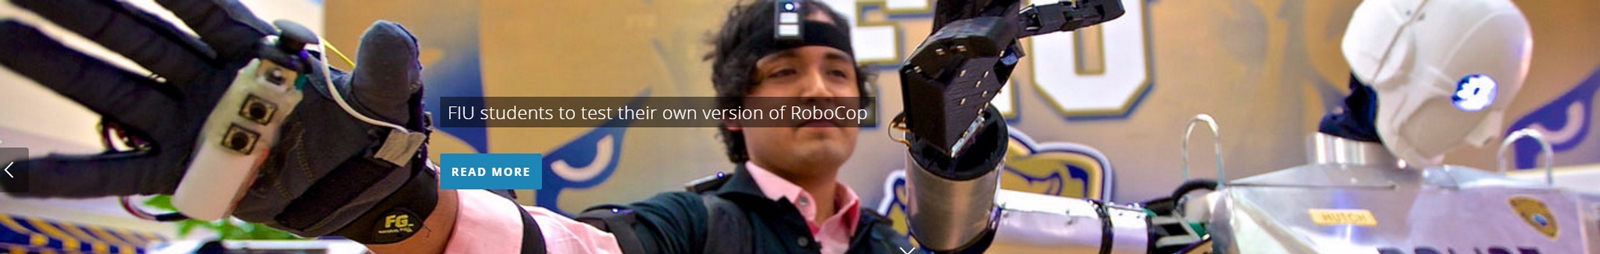 fiu-college-engineering-compuing-30th-anniversary-students-test-robocop-1600-wide